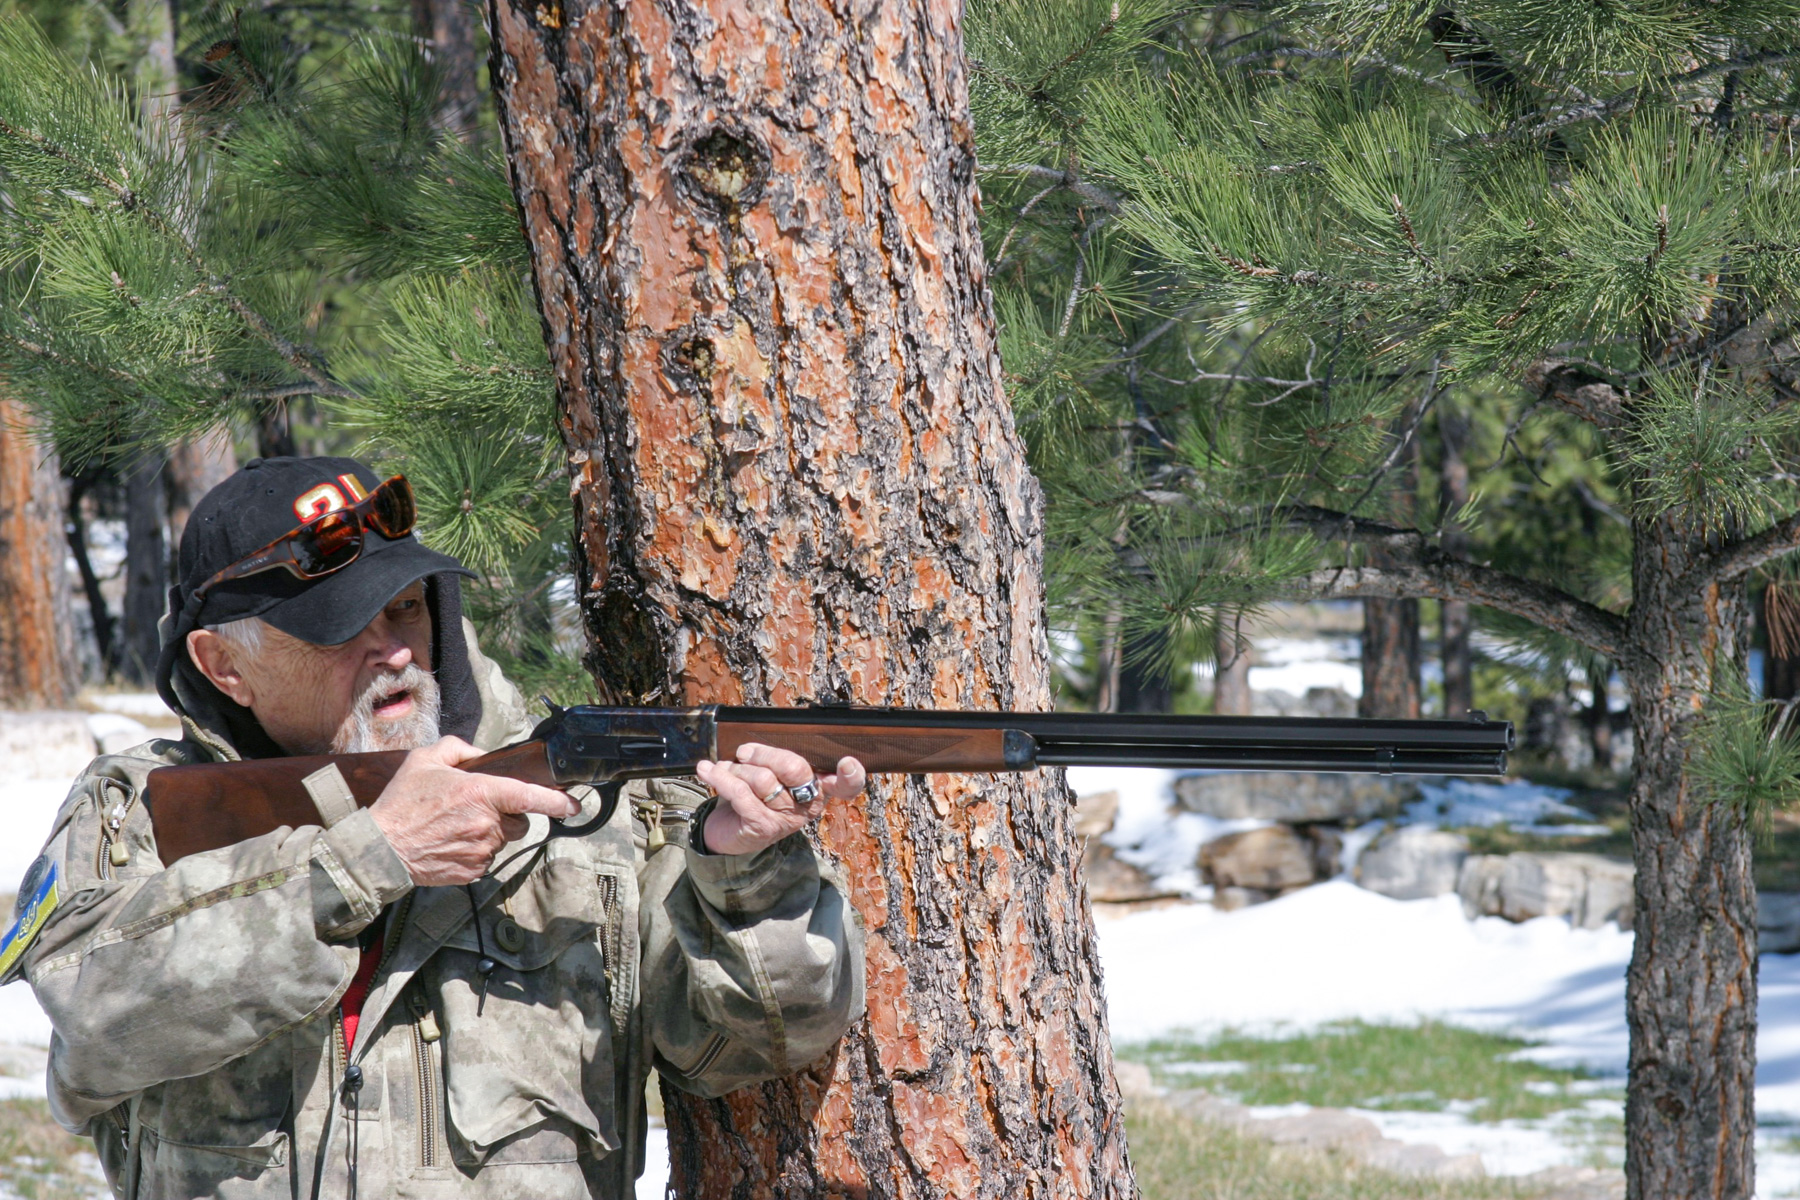 lever action hunting rifles